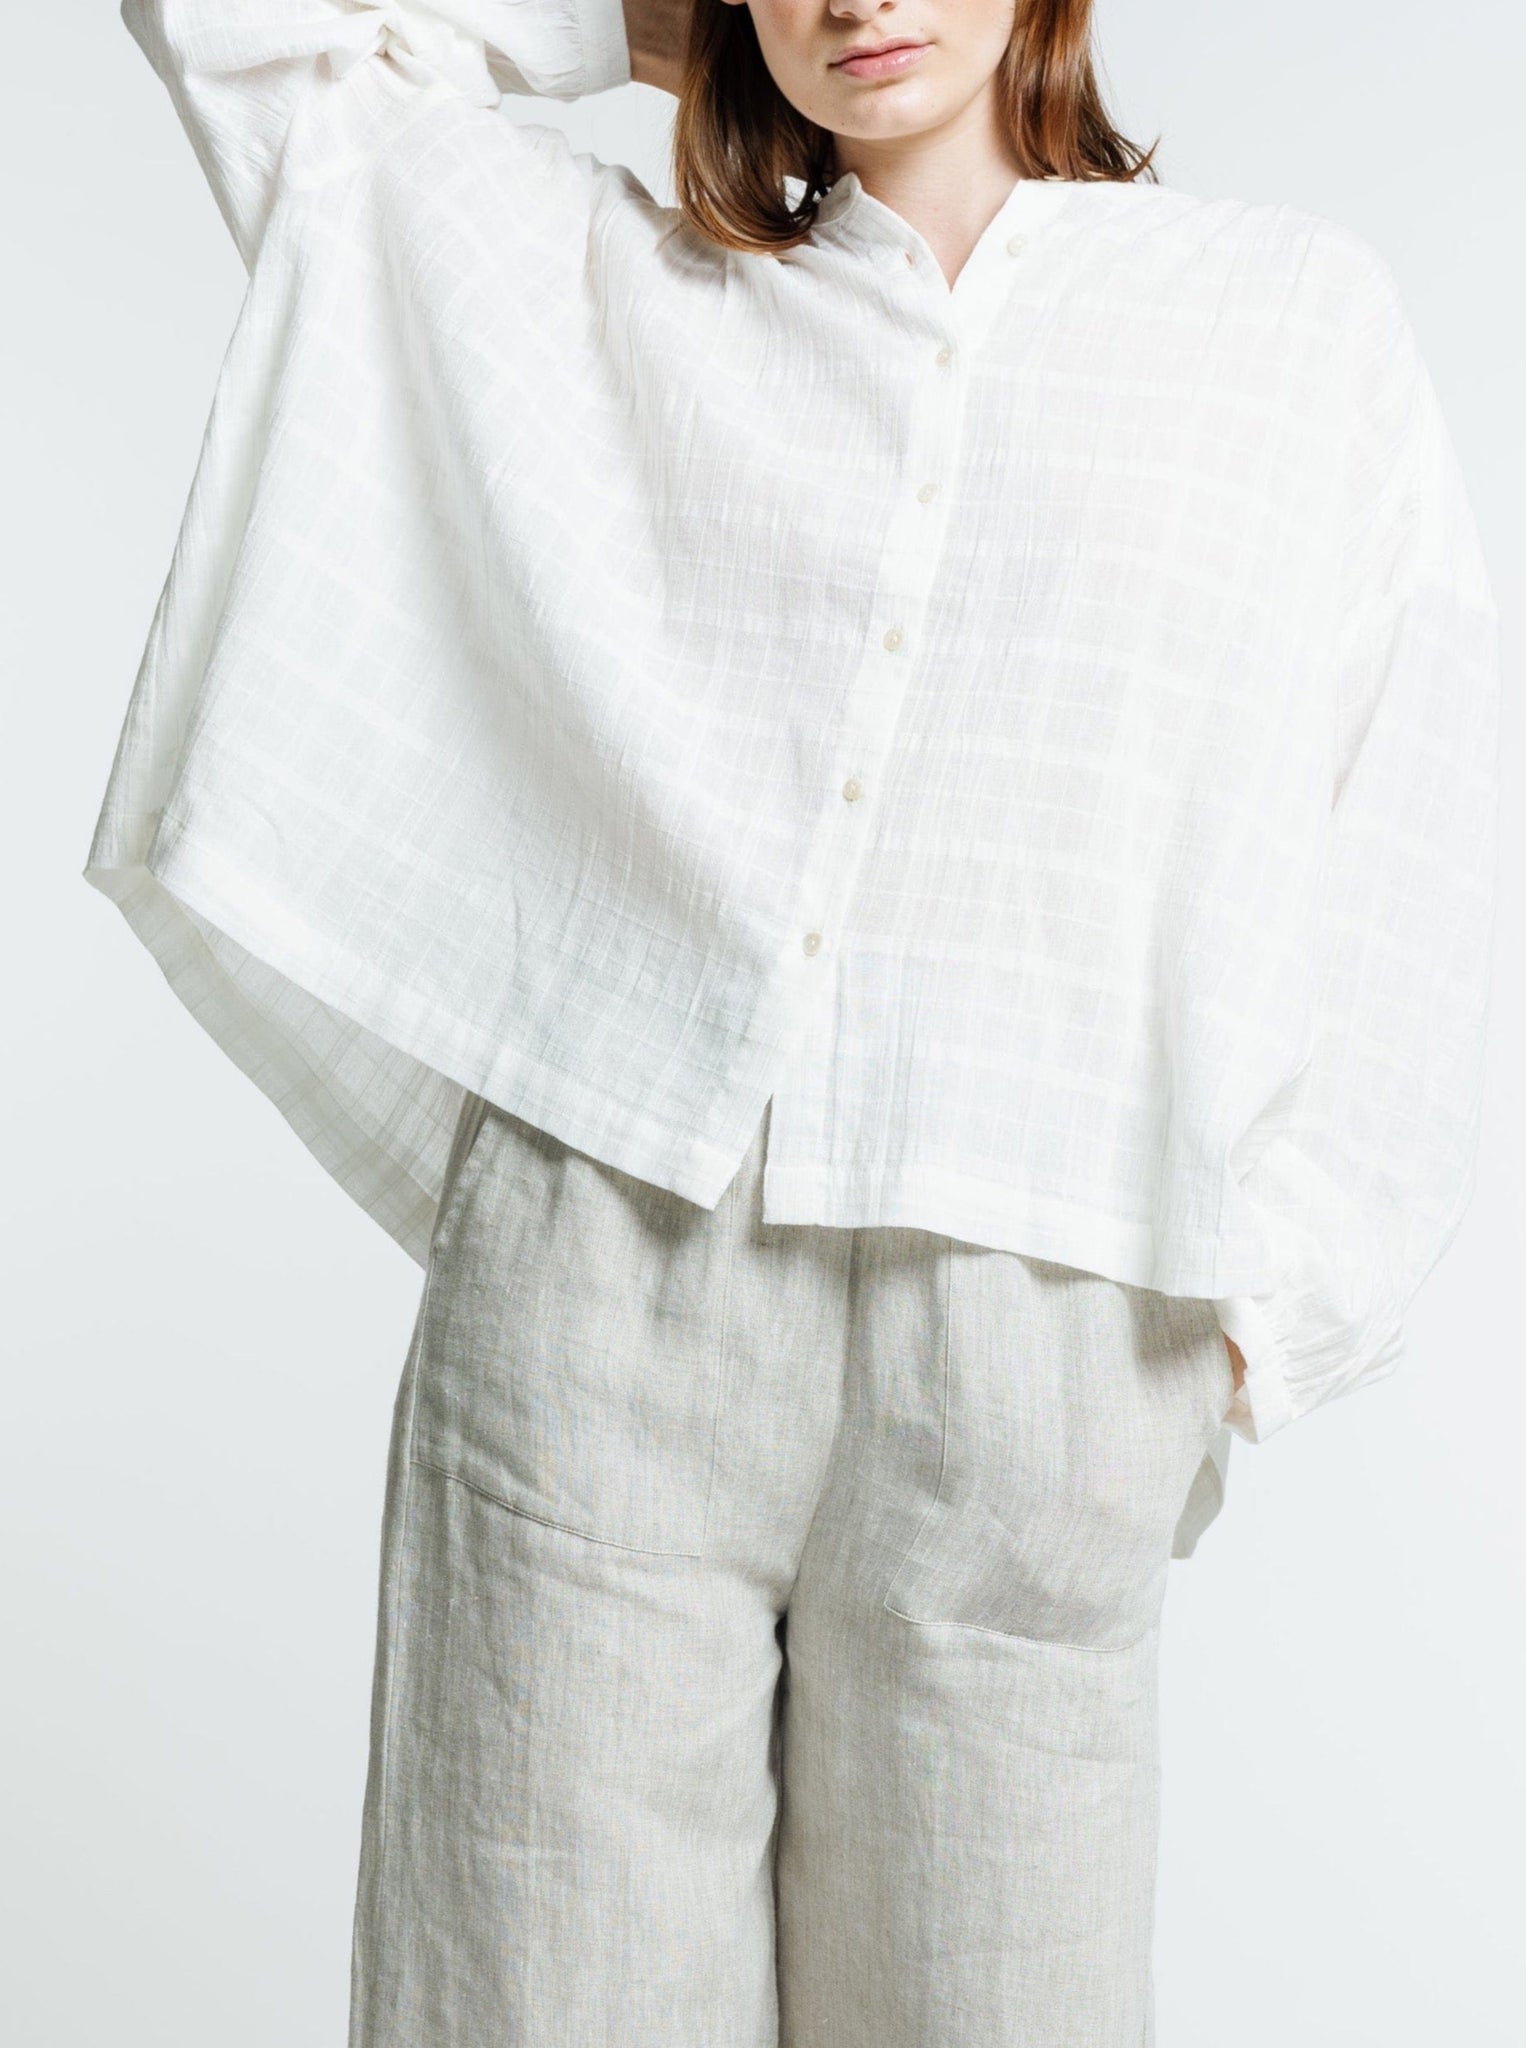 The model is wearing the Francoise Top - Alabaster Plaid and wide leg pants.